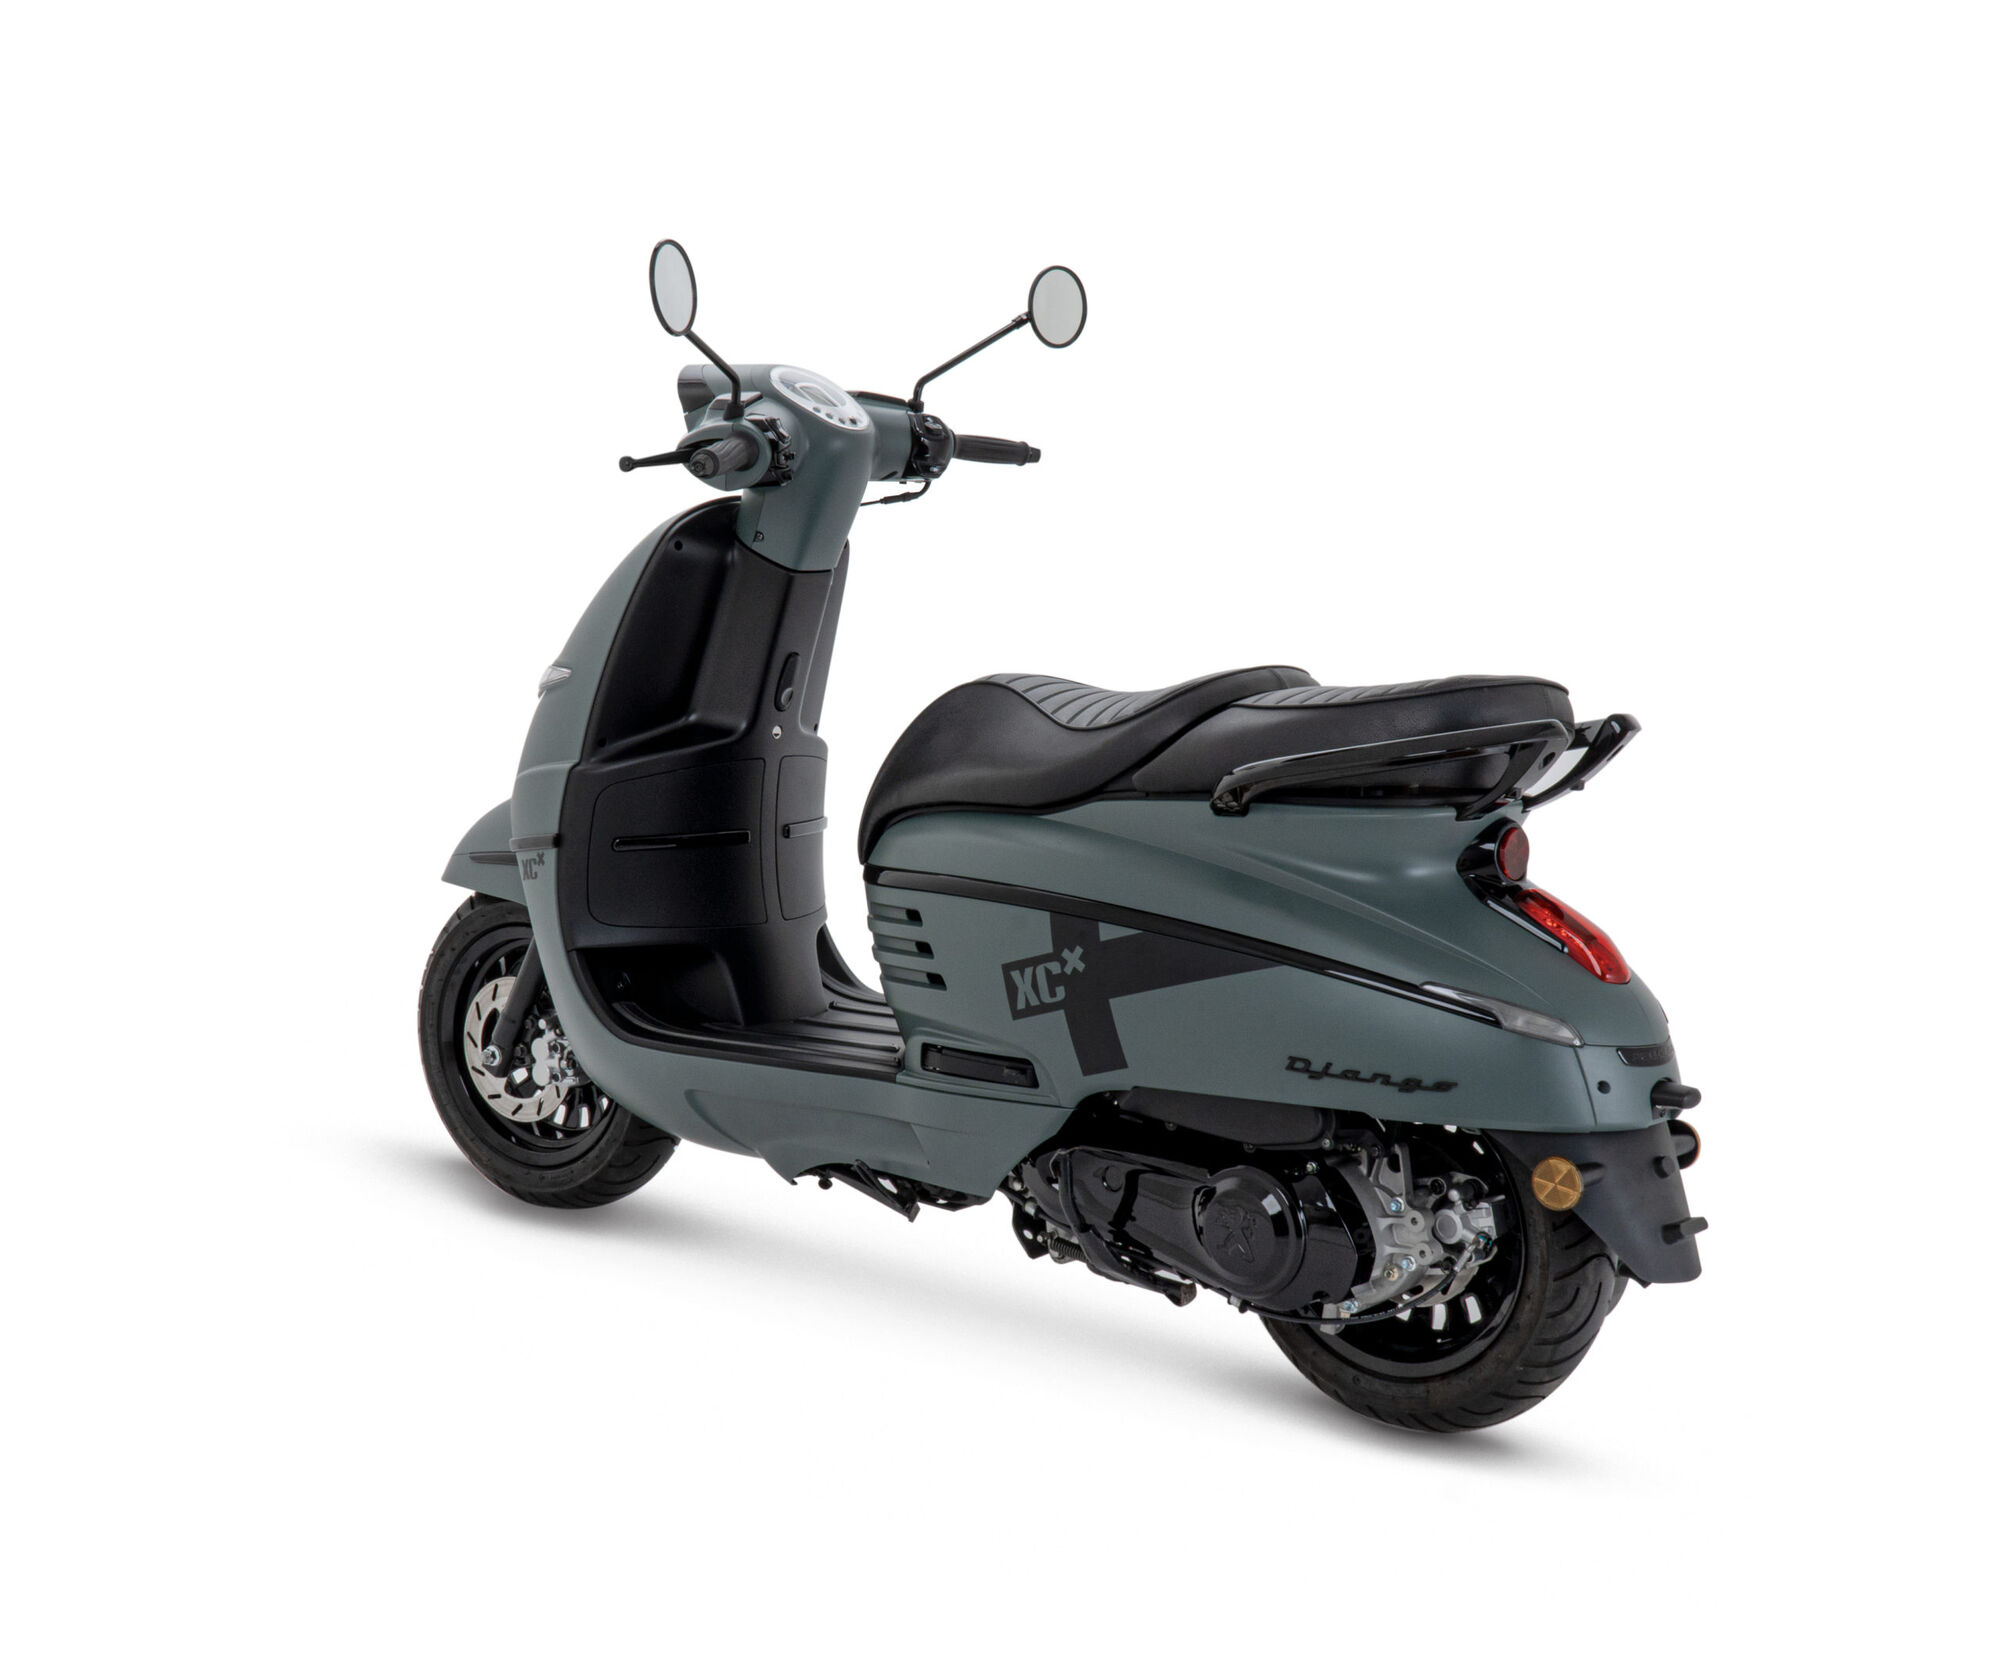 PEUGEOT Django 125 Shadow 2023 :: £3649.00 :: Motorcycles Scooters :: 125cc SCOOTERS :: WHATEVERWHEELS - ATV, Motorbike Scooter Centre - Lancashire's Best For Quad, Buggy, 50cc & 125cc Motorcycle and Moped Sale